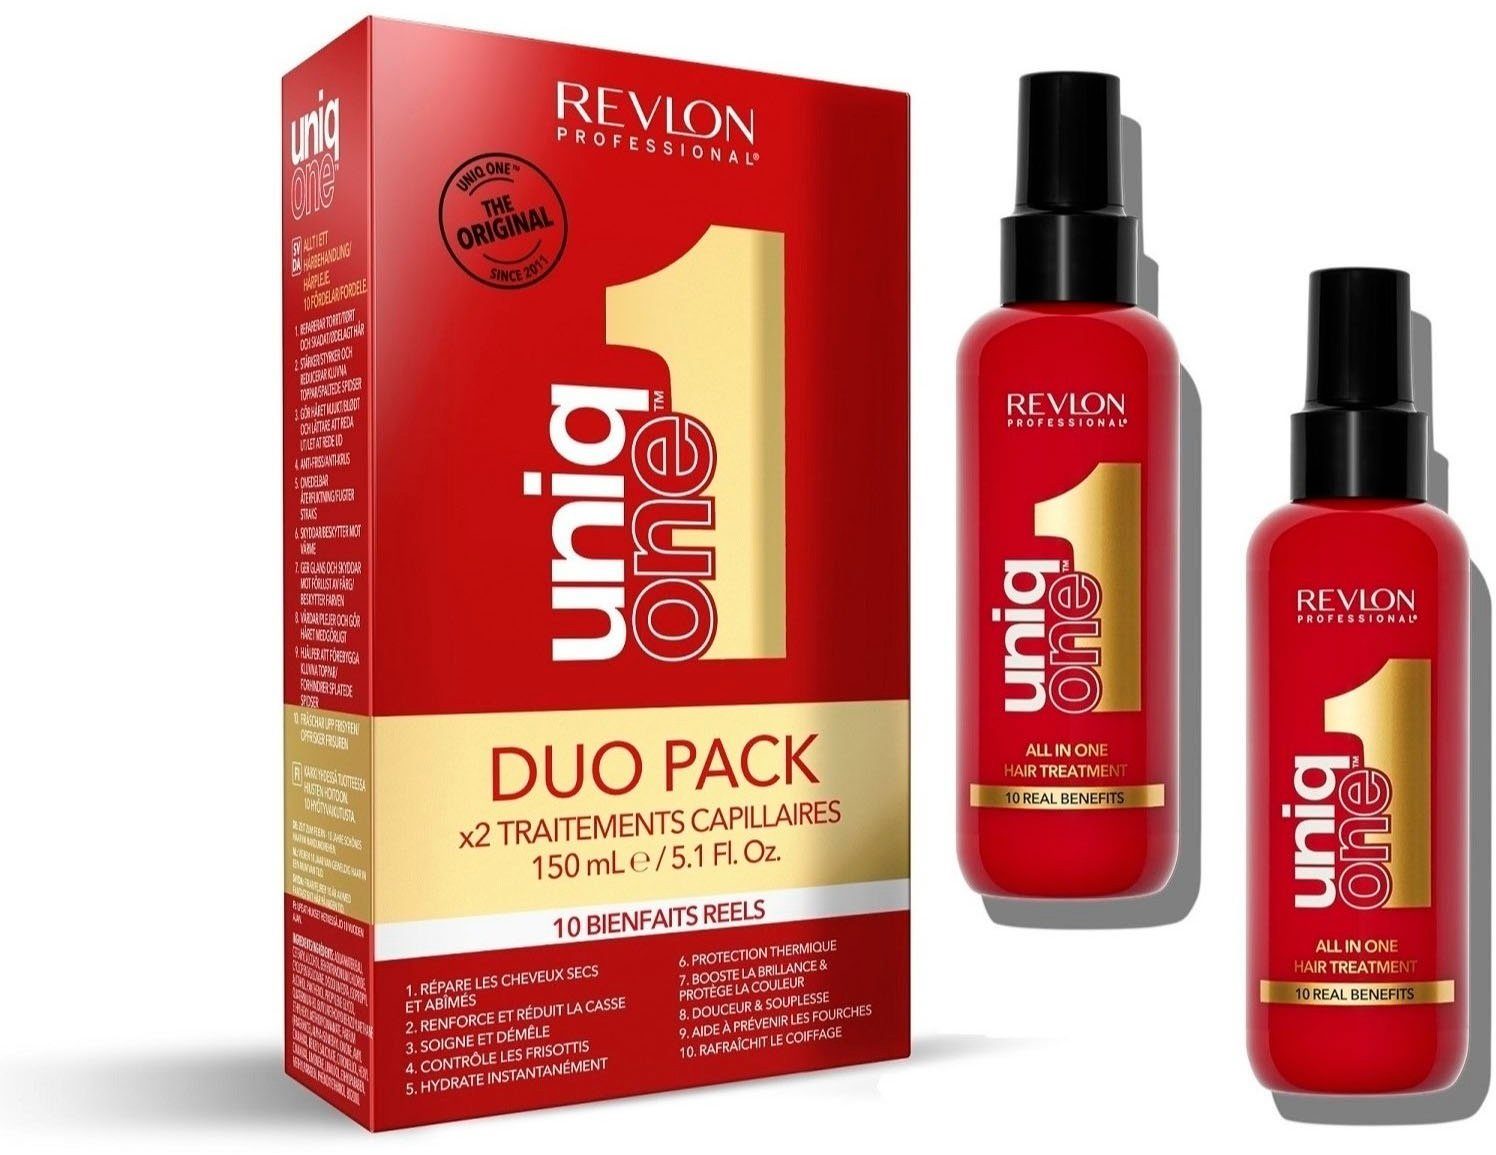 One Uniqone Hair 2-tlg., Treatment PROFESSIONAL Spar-Set, REVLON Classic Edition Limited Leave-in Haarpflege-Set All In Duopack Set, Pflege